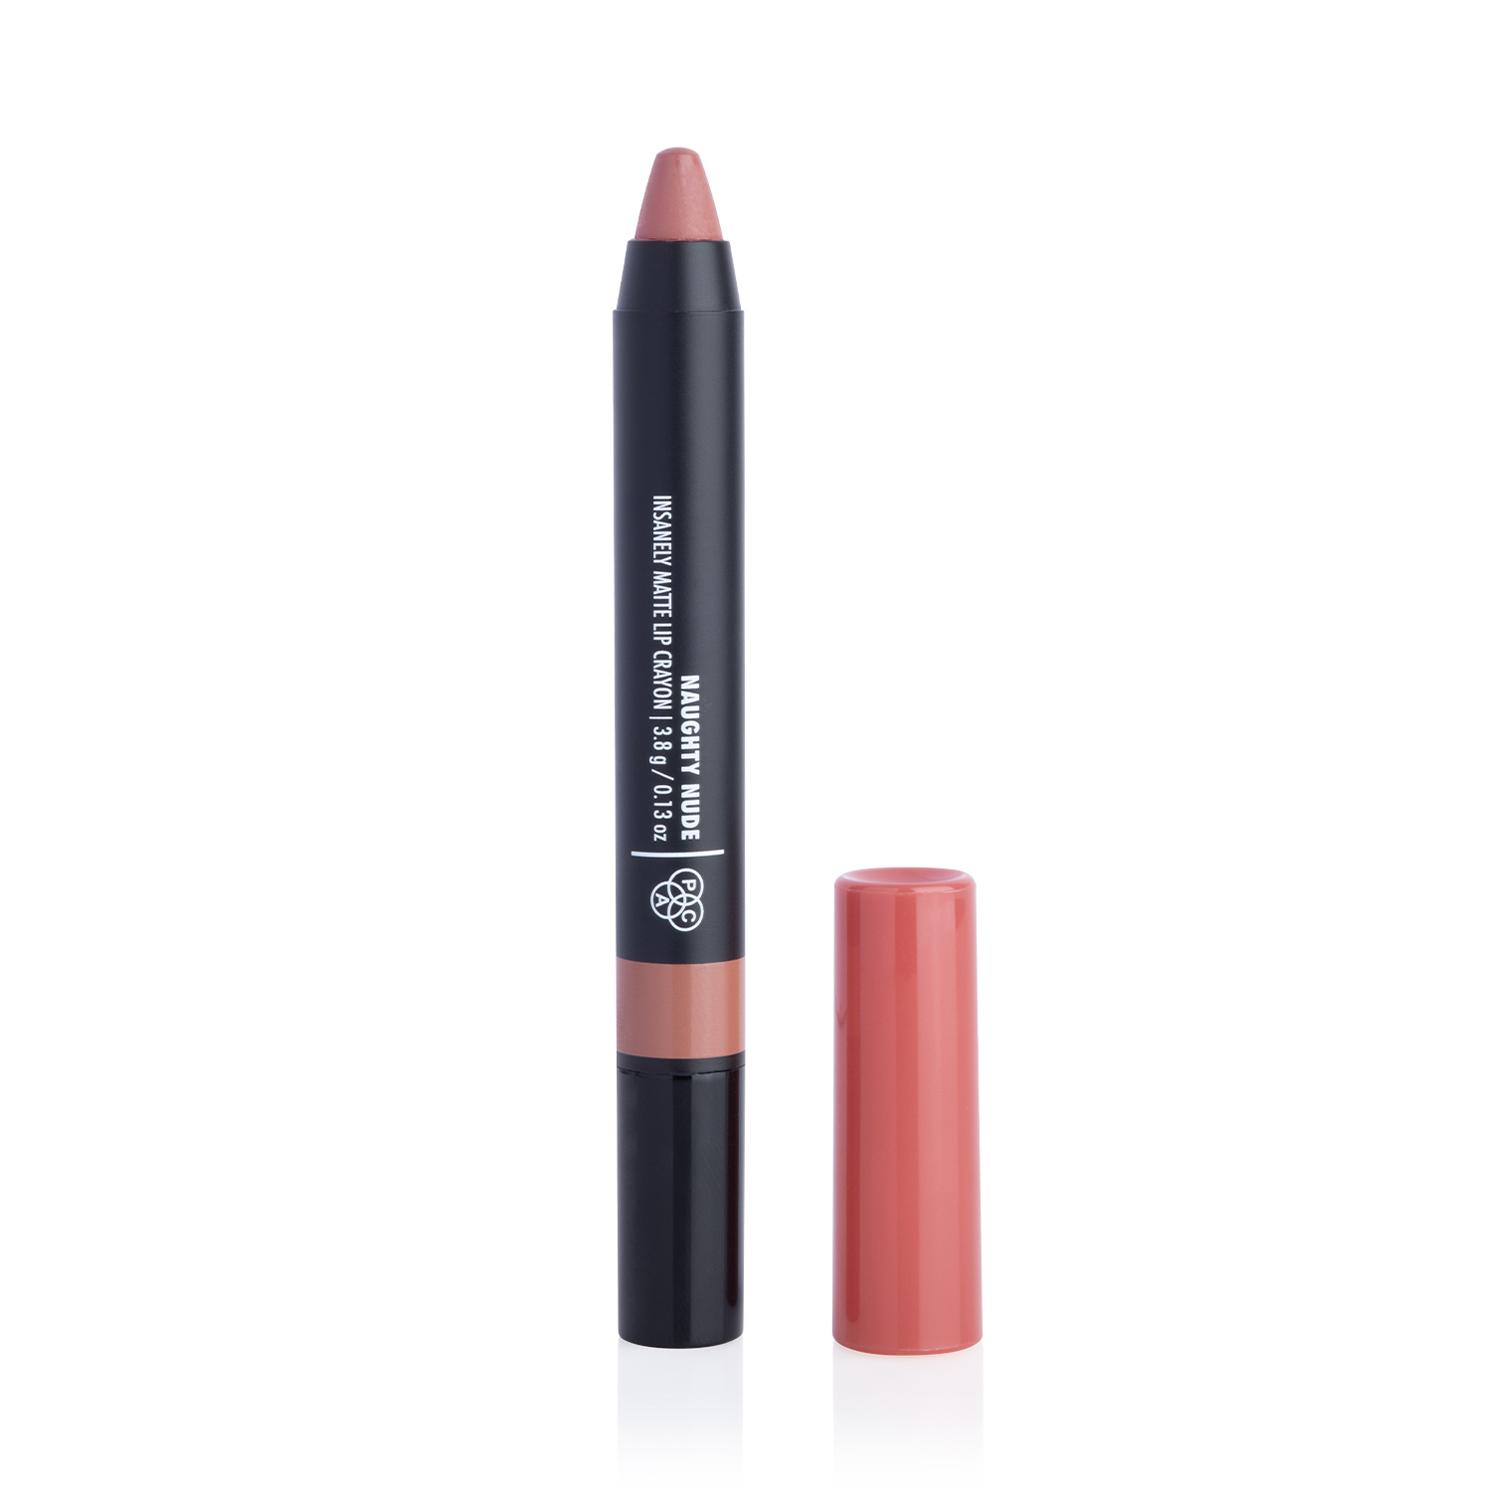 PAC | PAC Insanely Matte Lip Crayon - Naughty Nude (3.8g)